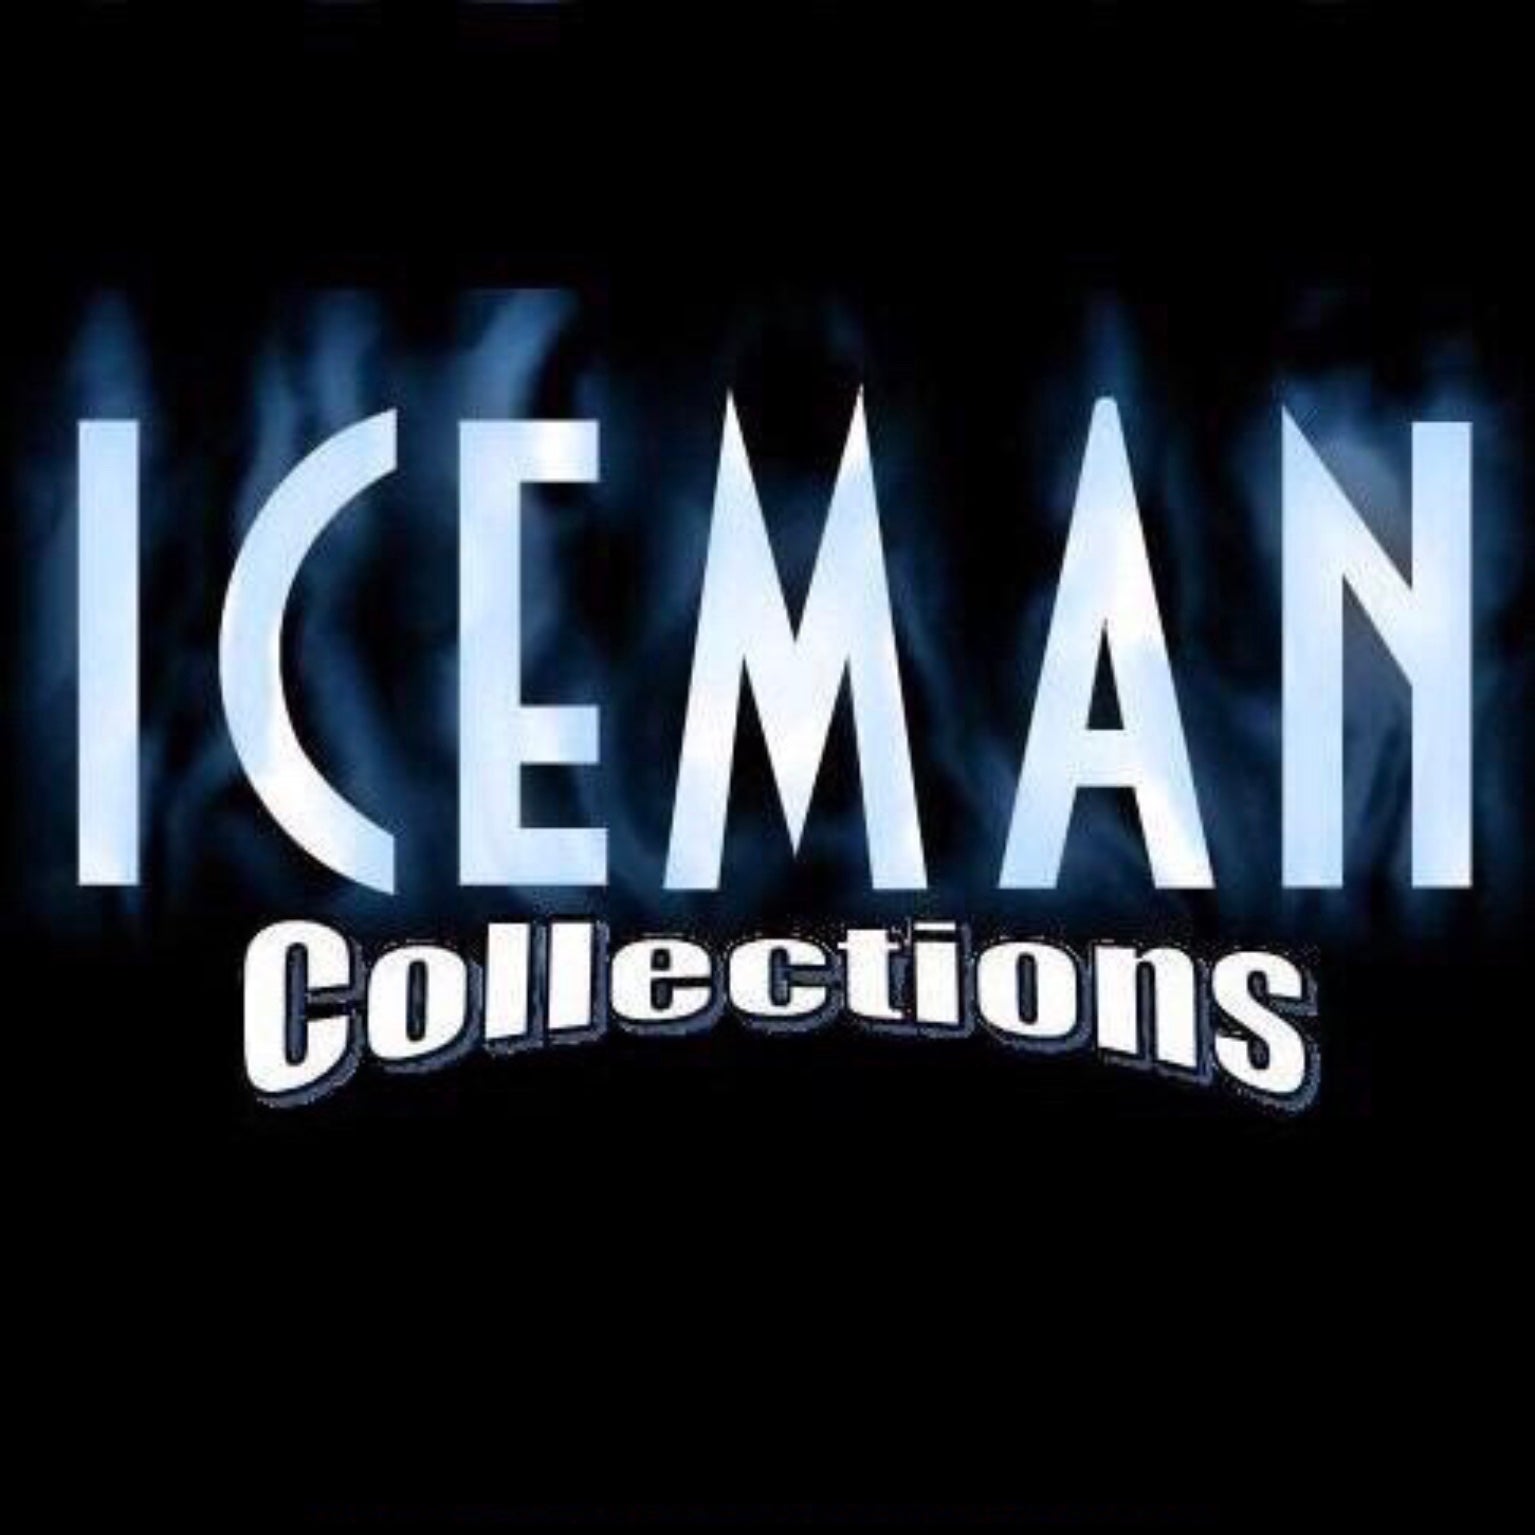 Iceman Collections – IcemanCollections